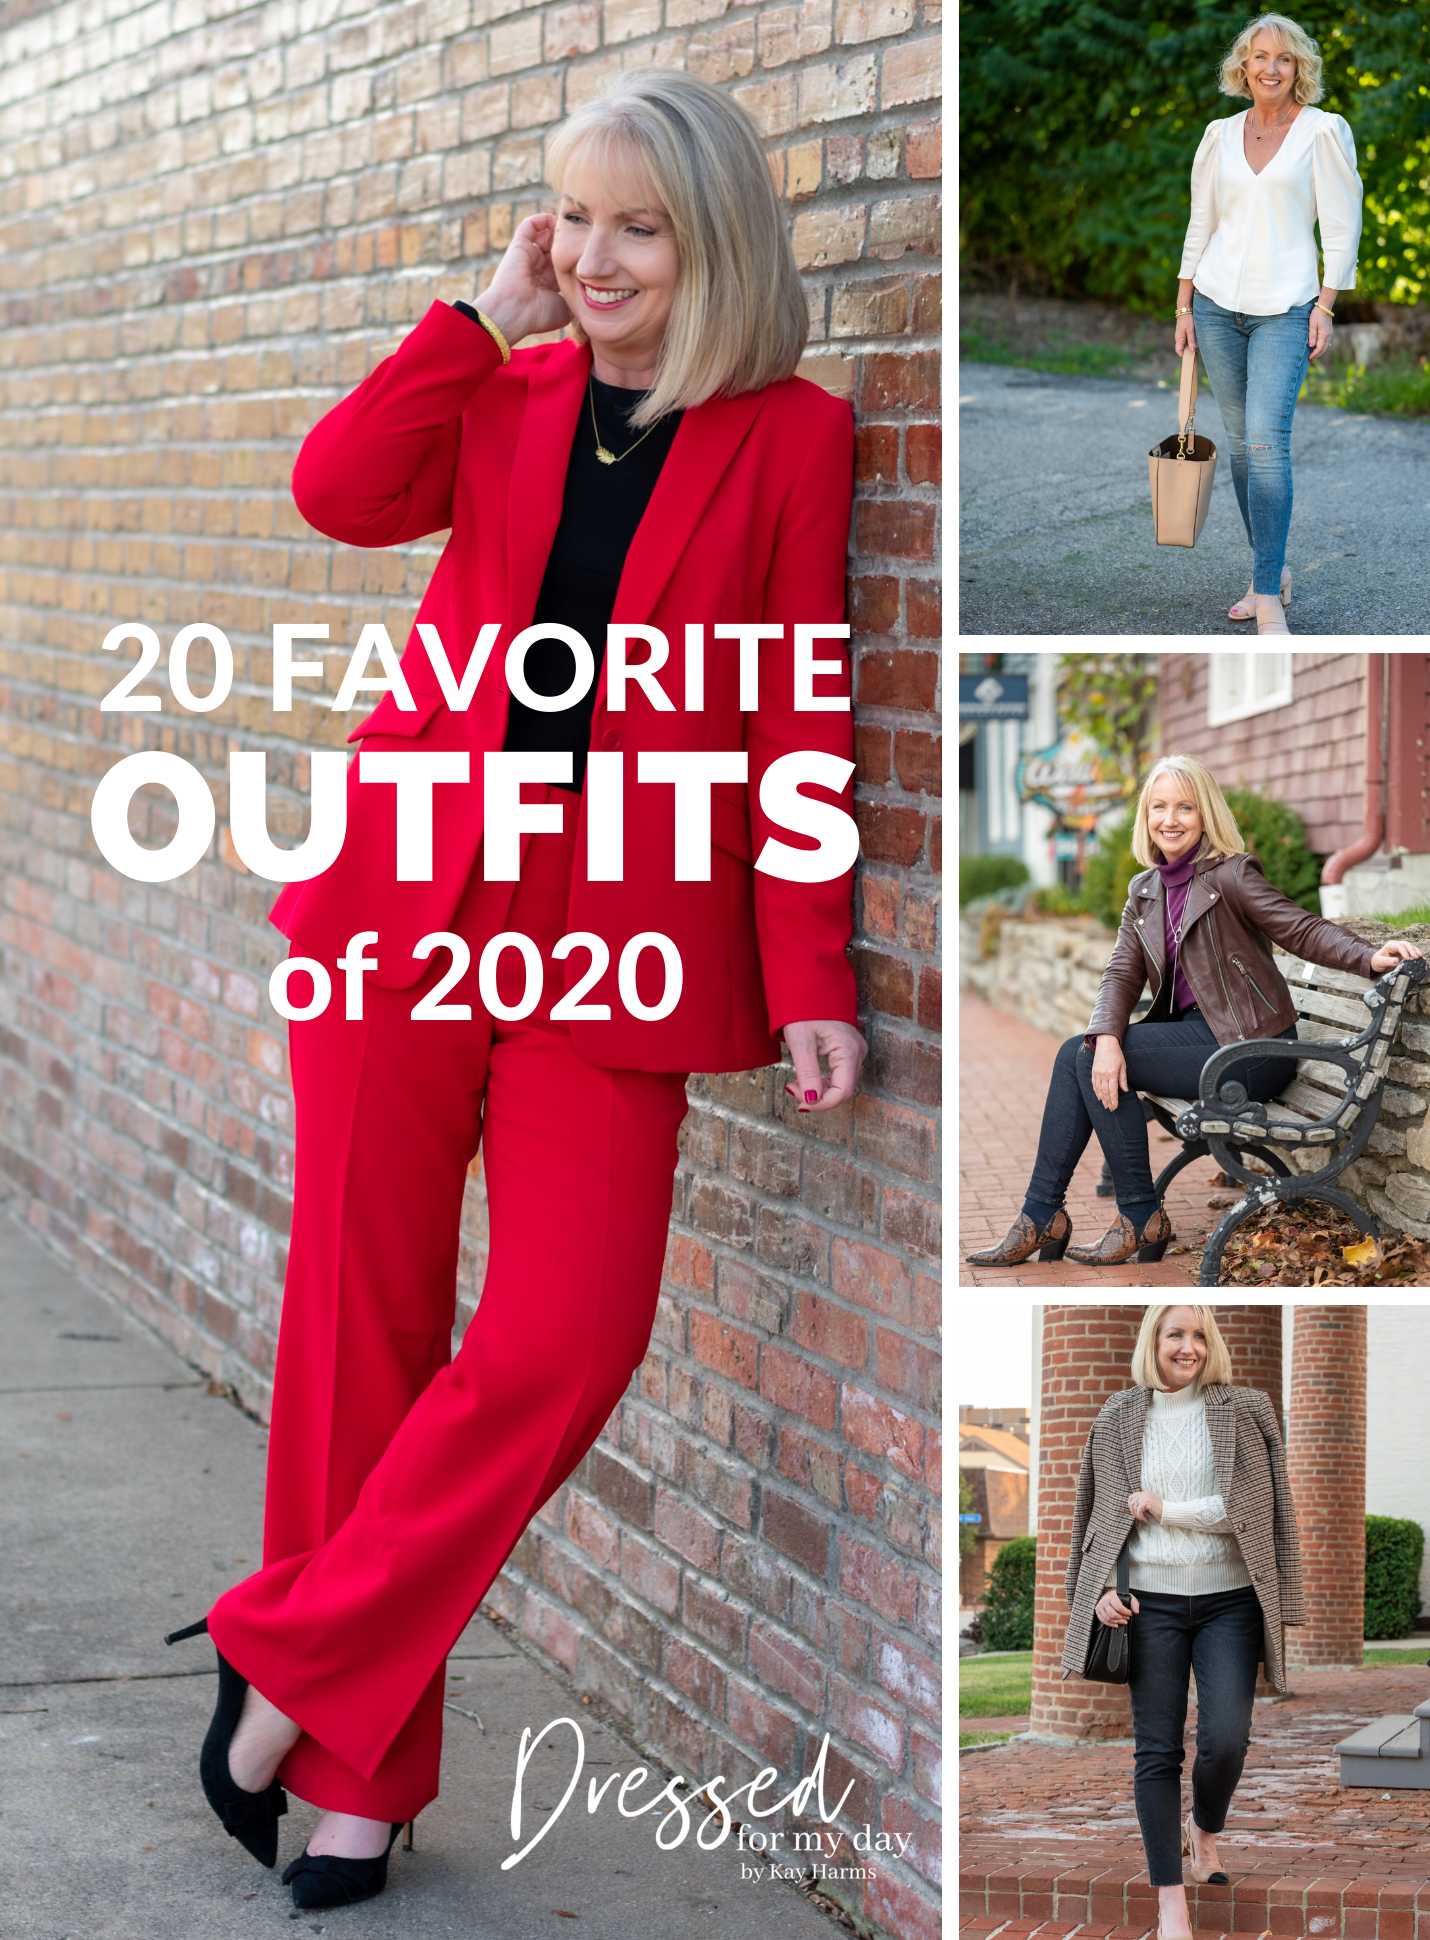 20 Favorite Outfits of 2020